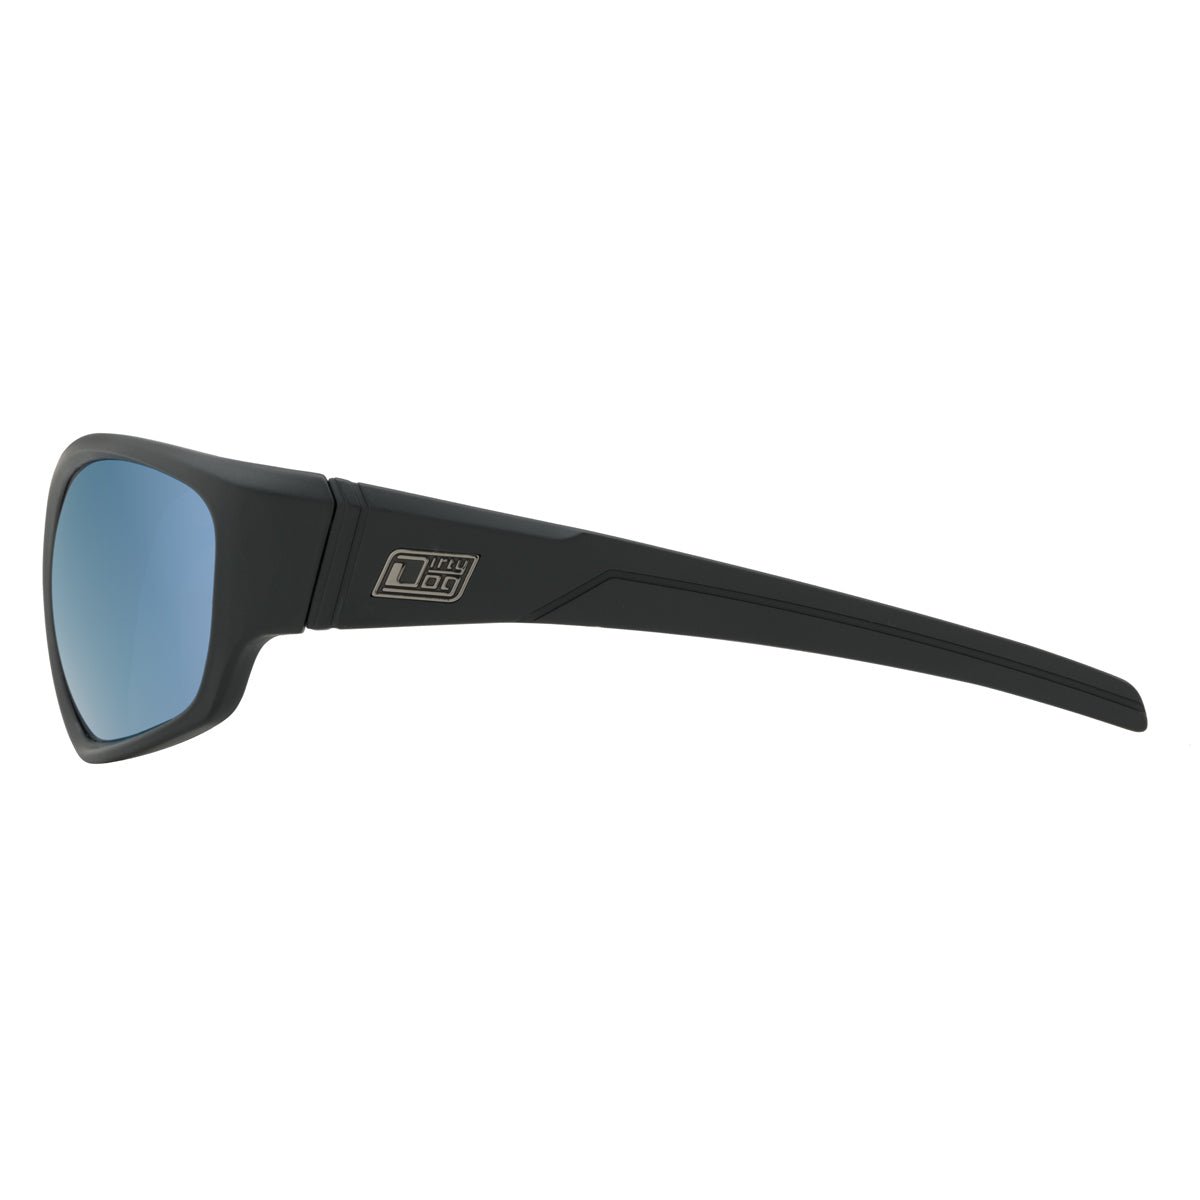 Dirty Dog Snapper Sunglasses - Worthing Watersports - 53766 - Sunglasses - Dirty Dog